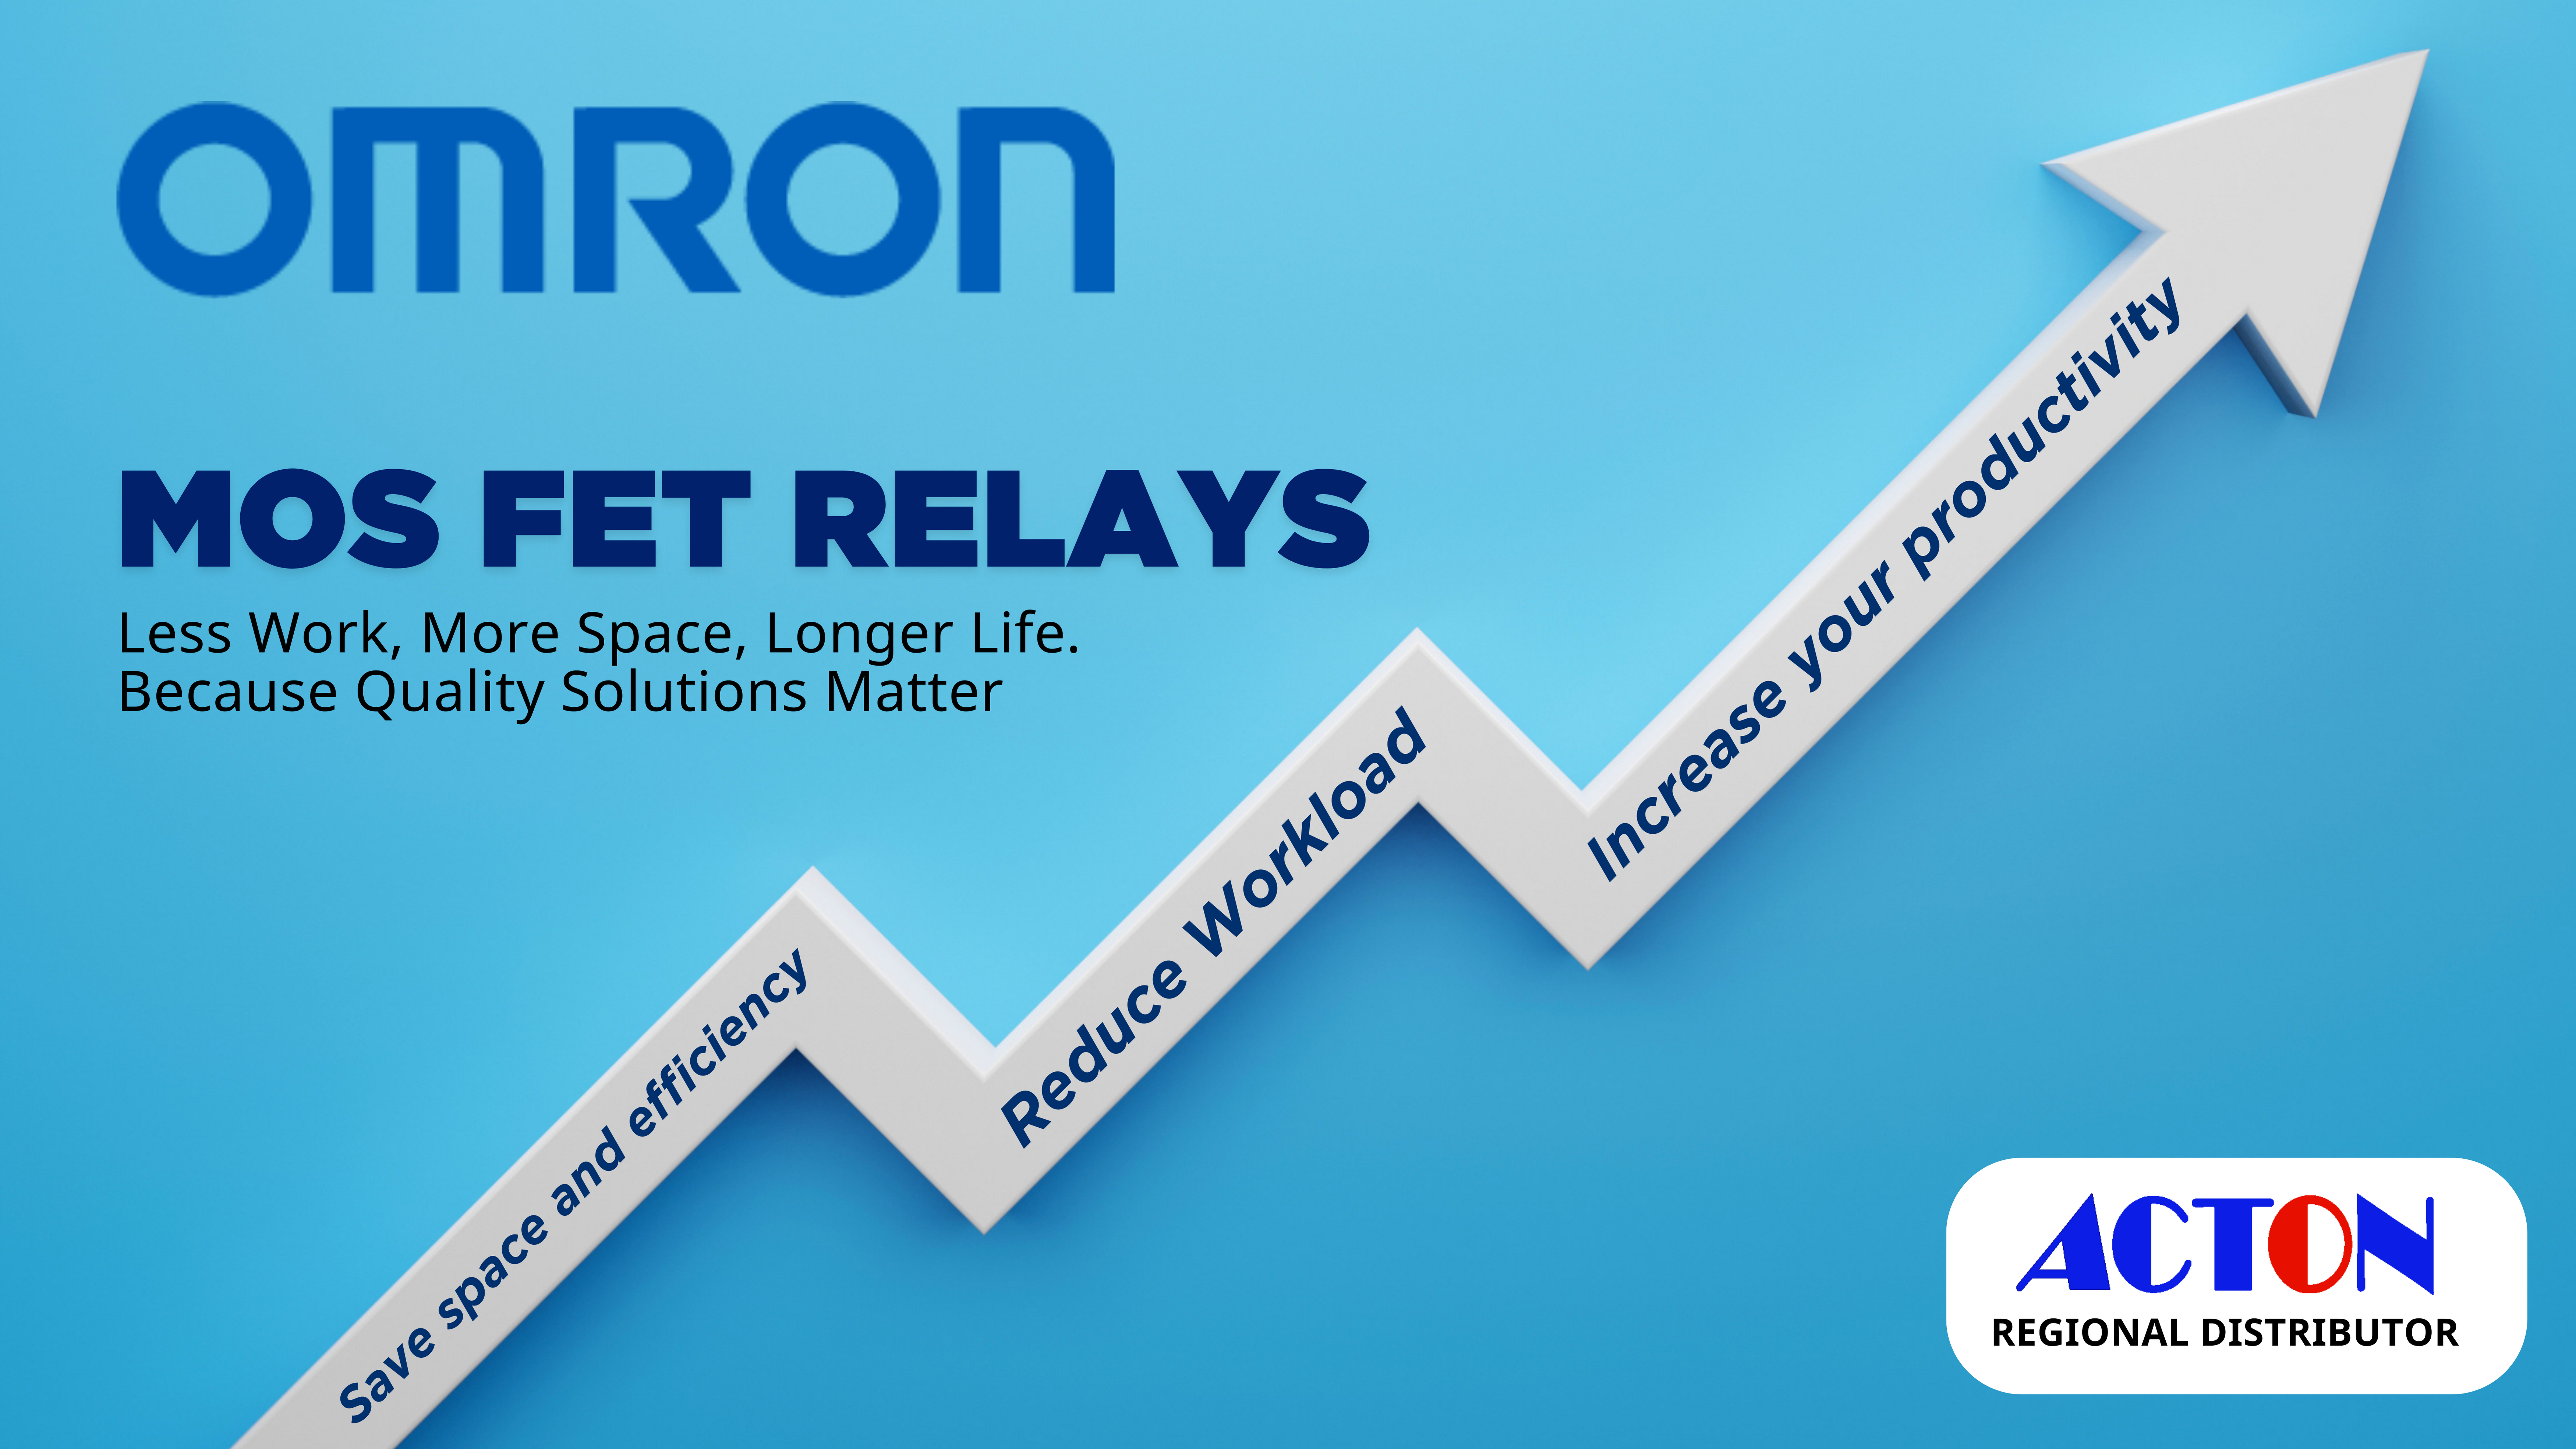 Why Engineers Choose Acton Tech for OMRON MOS FET Relays